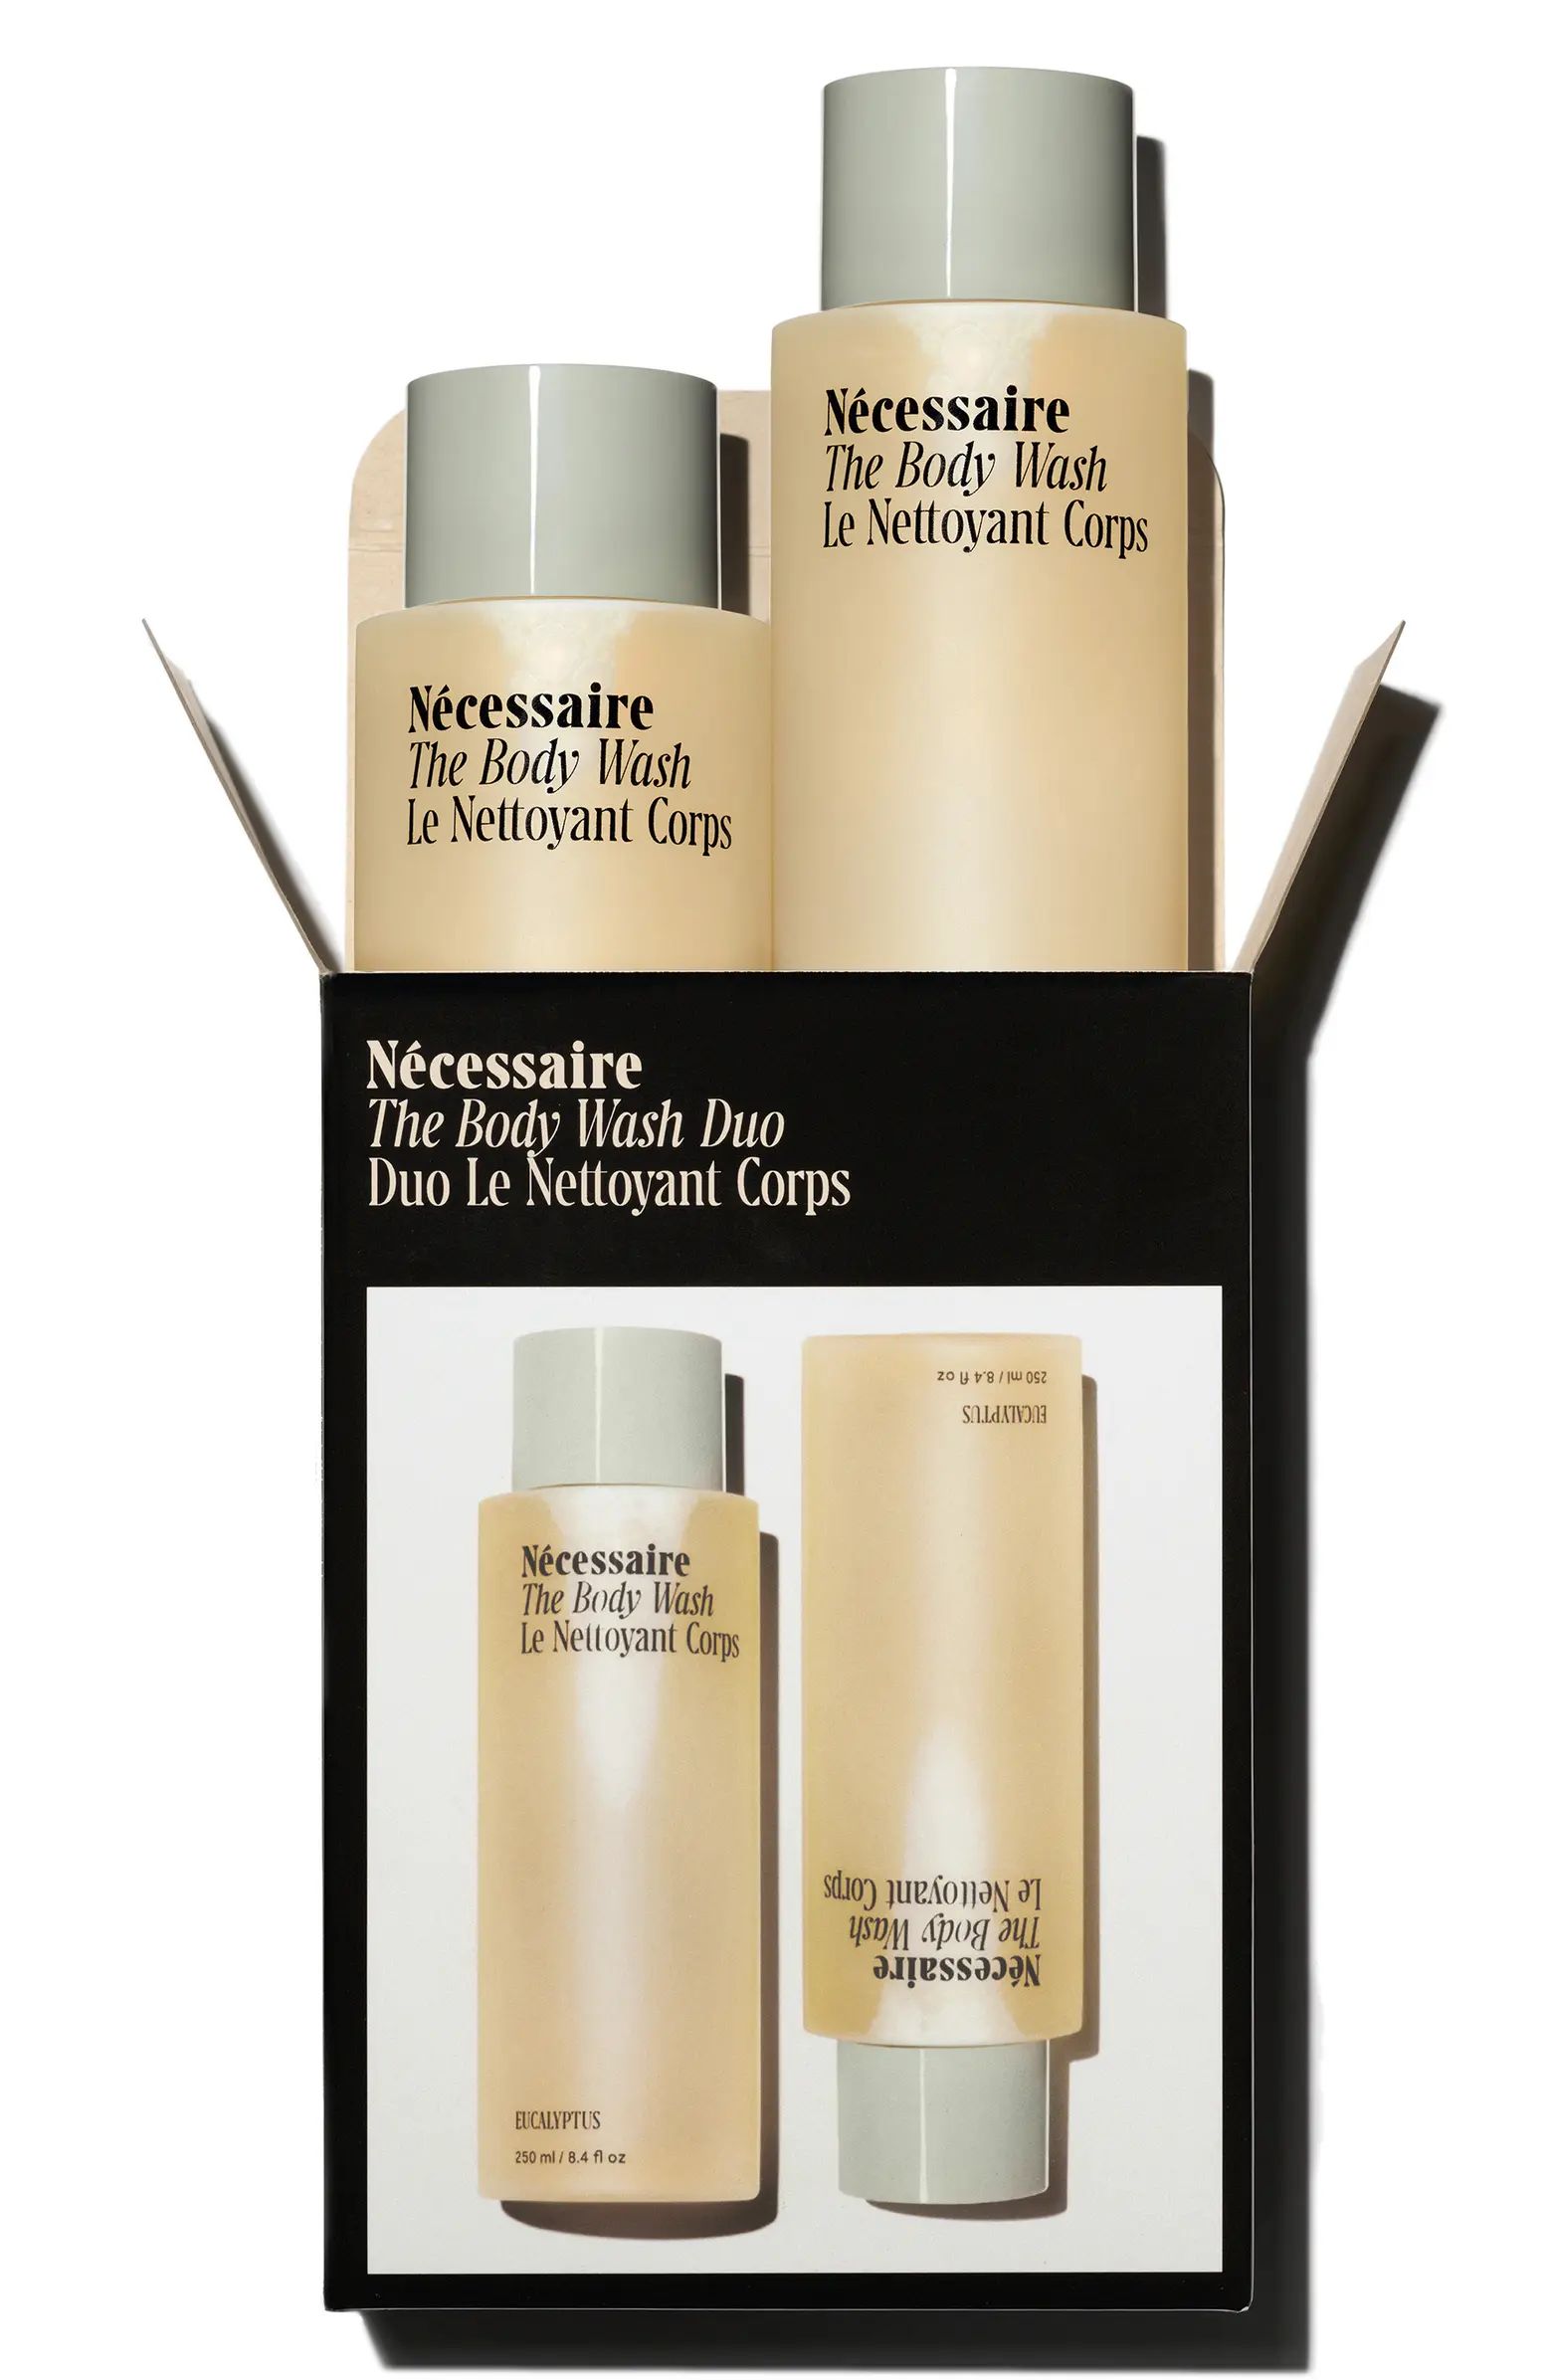 Nécessaire The Body Wash Duo Set $50 Value | Nordstrom | Nordstrom